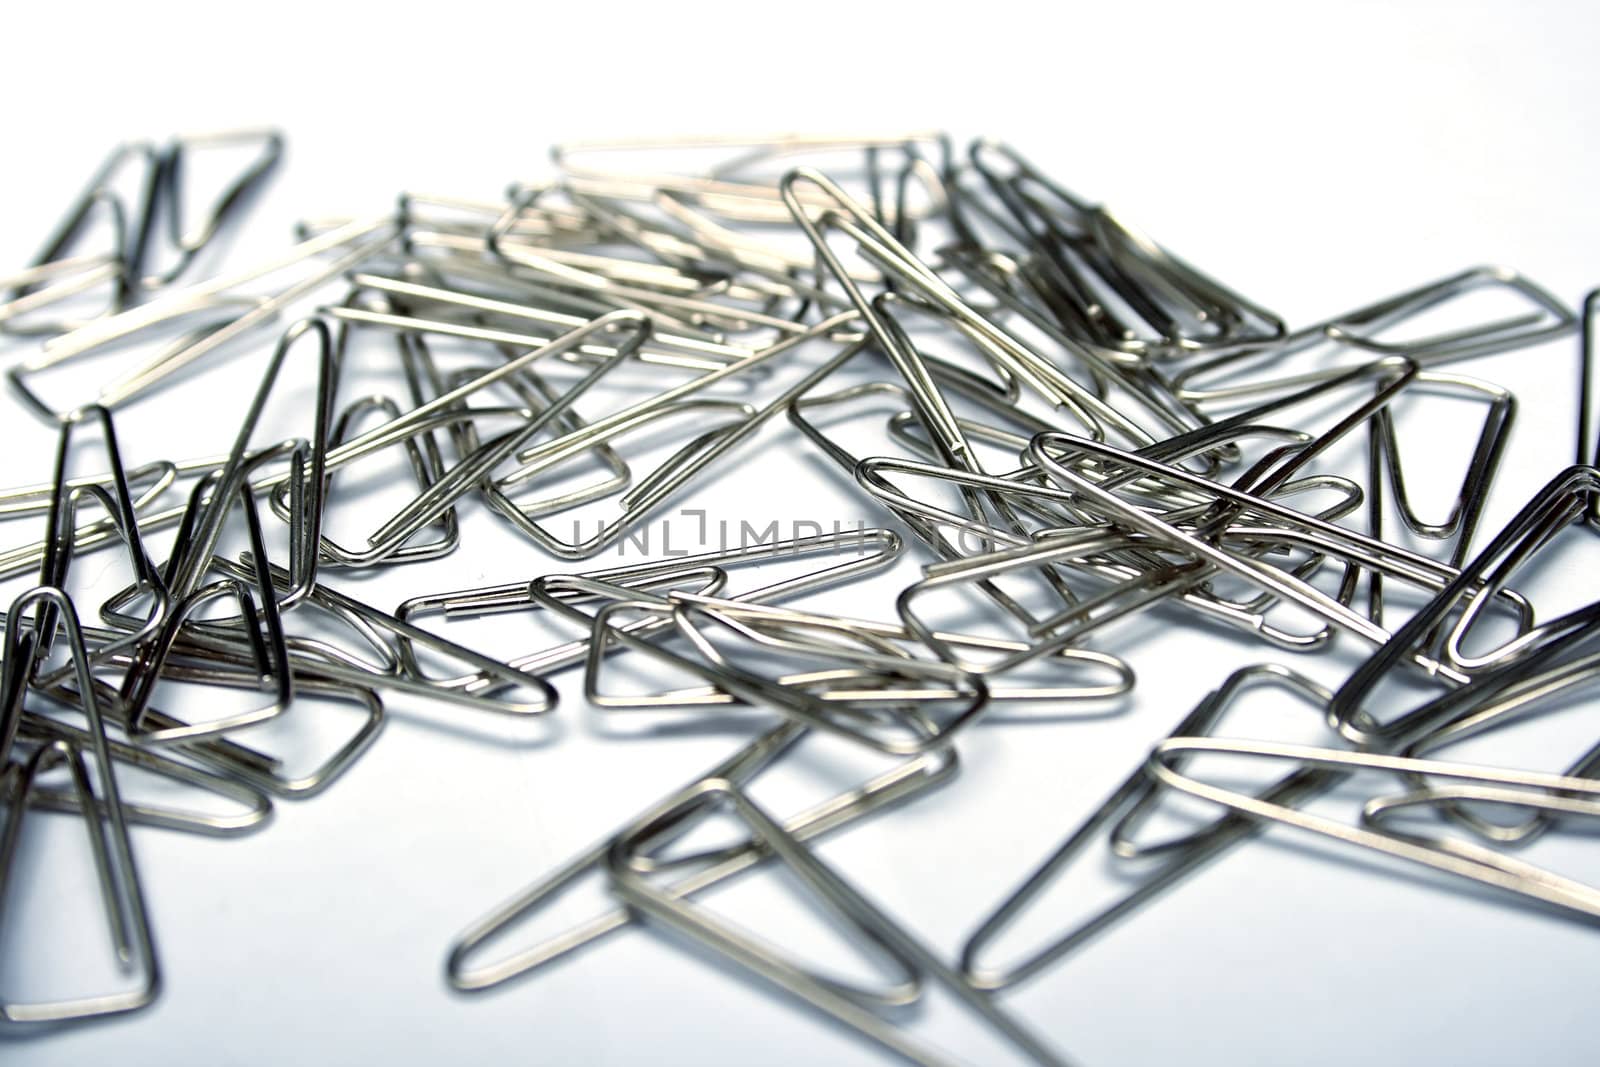 Writing paper clips on white background. Shallow DOF